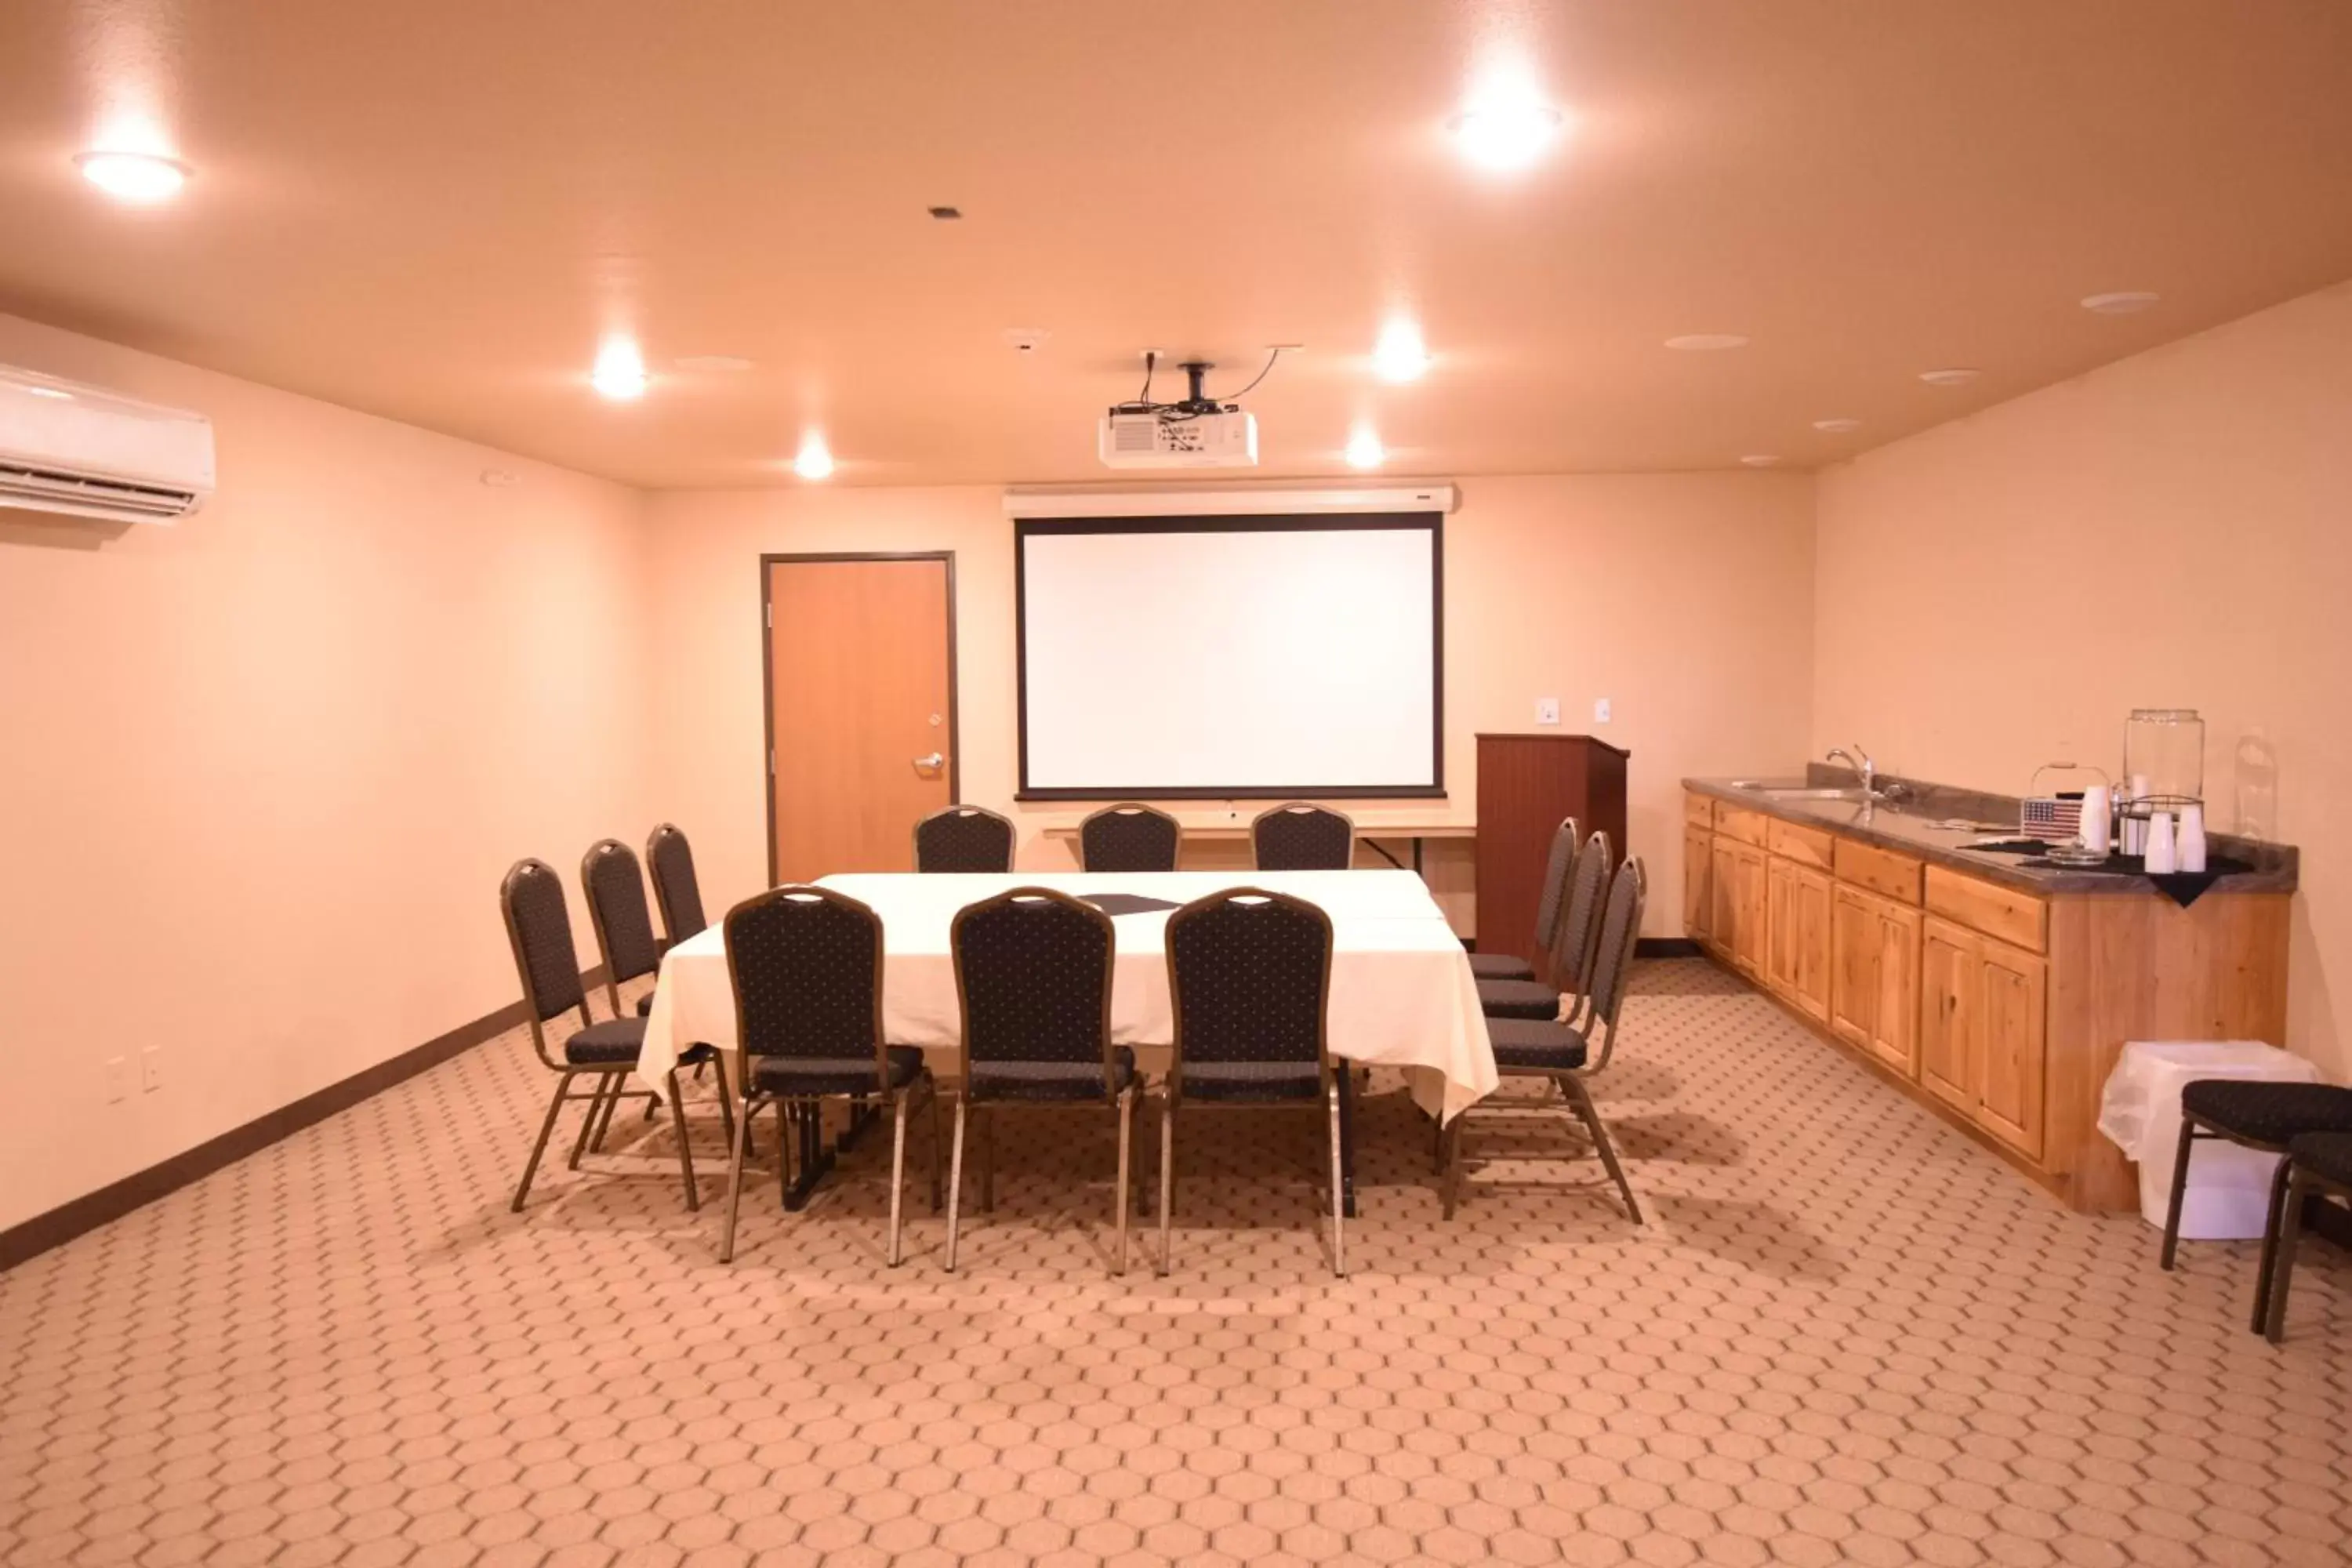 Banquet/Function facilities in Newcastle Lodge & Convention Center